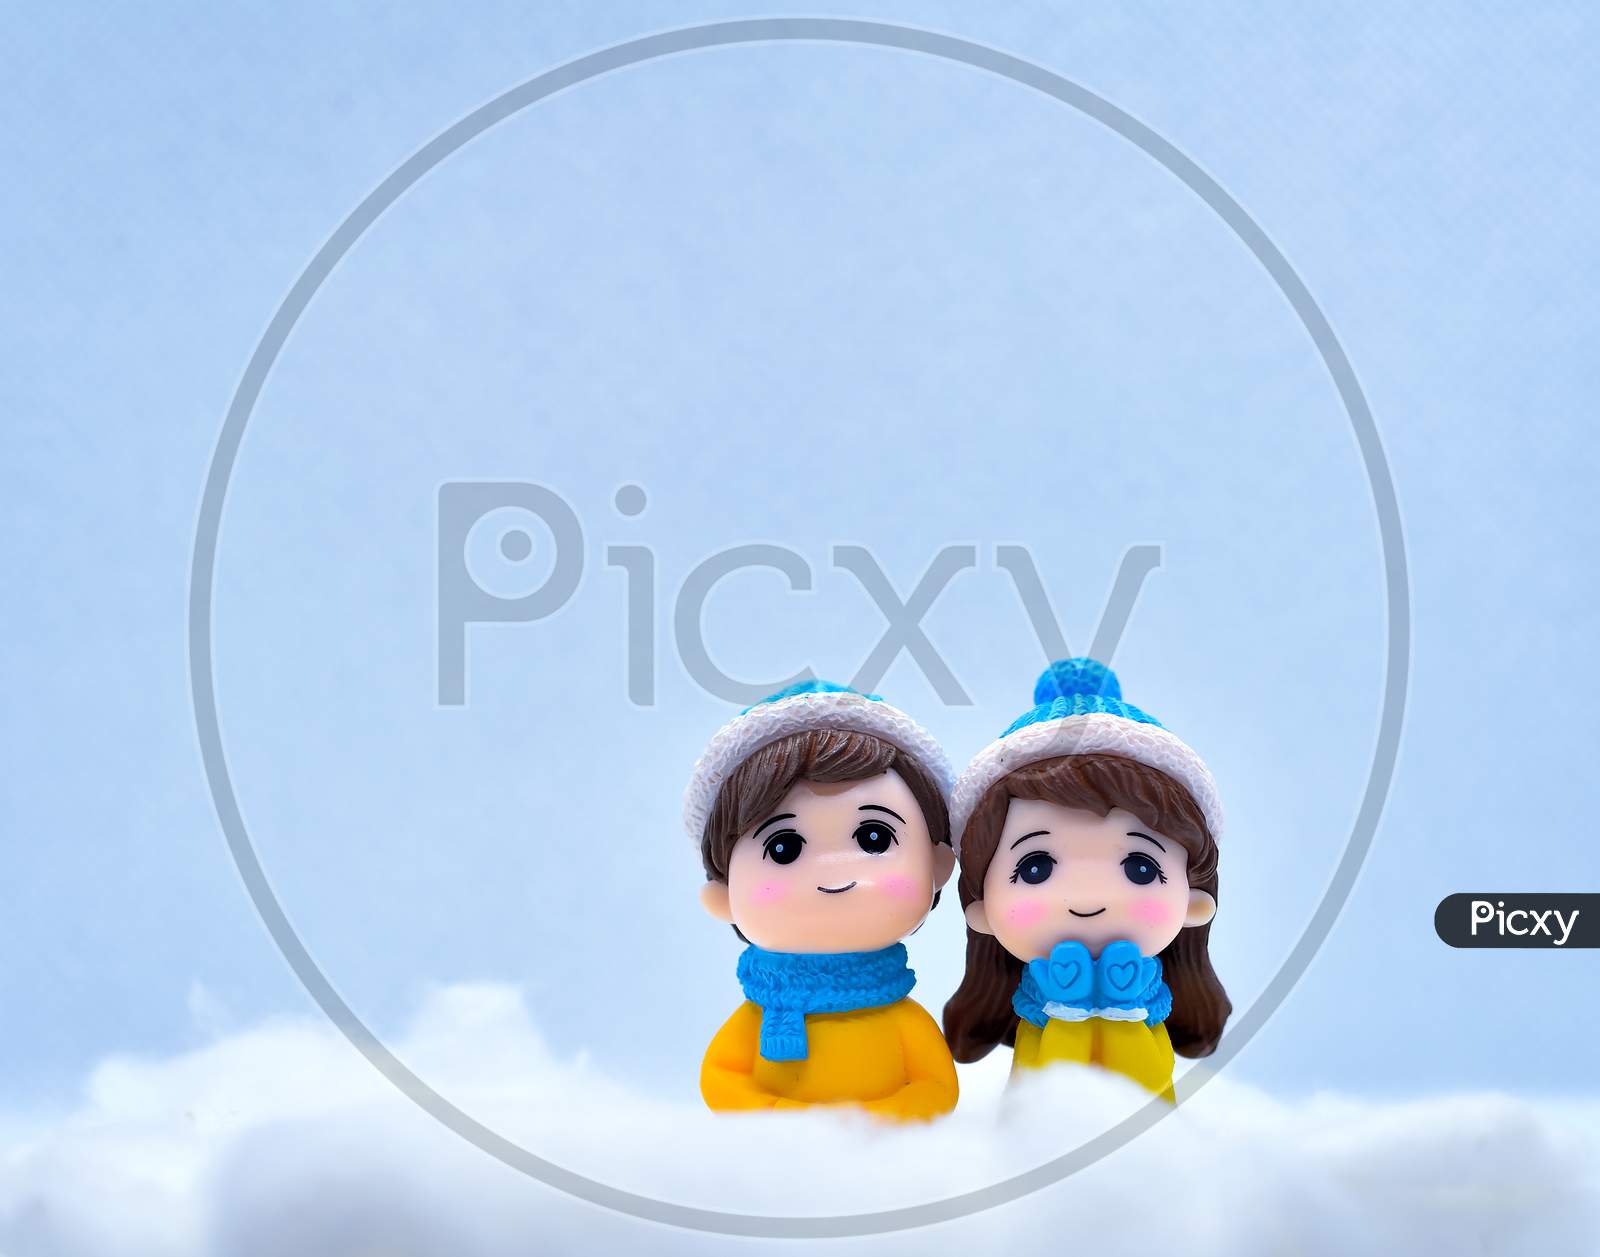 Tourism And Travel Concept: Miniature People In Winter Snow Along With Little Snowman